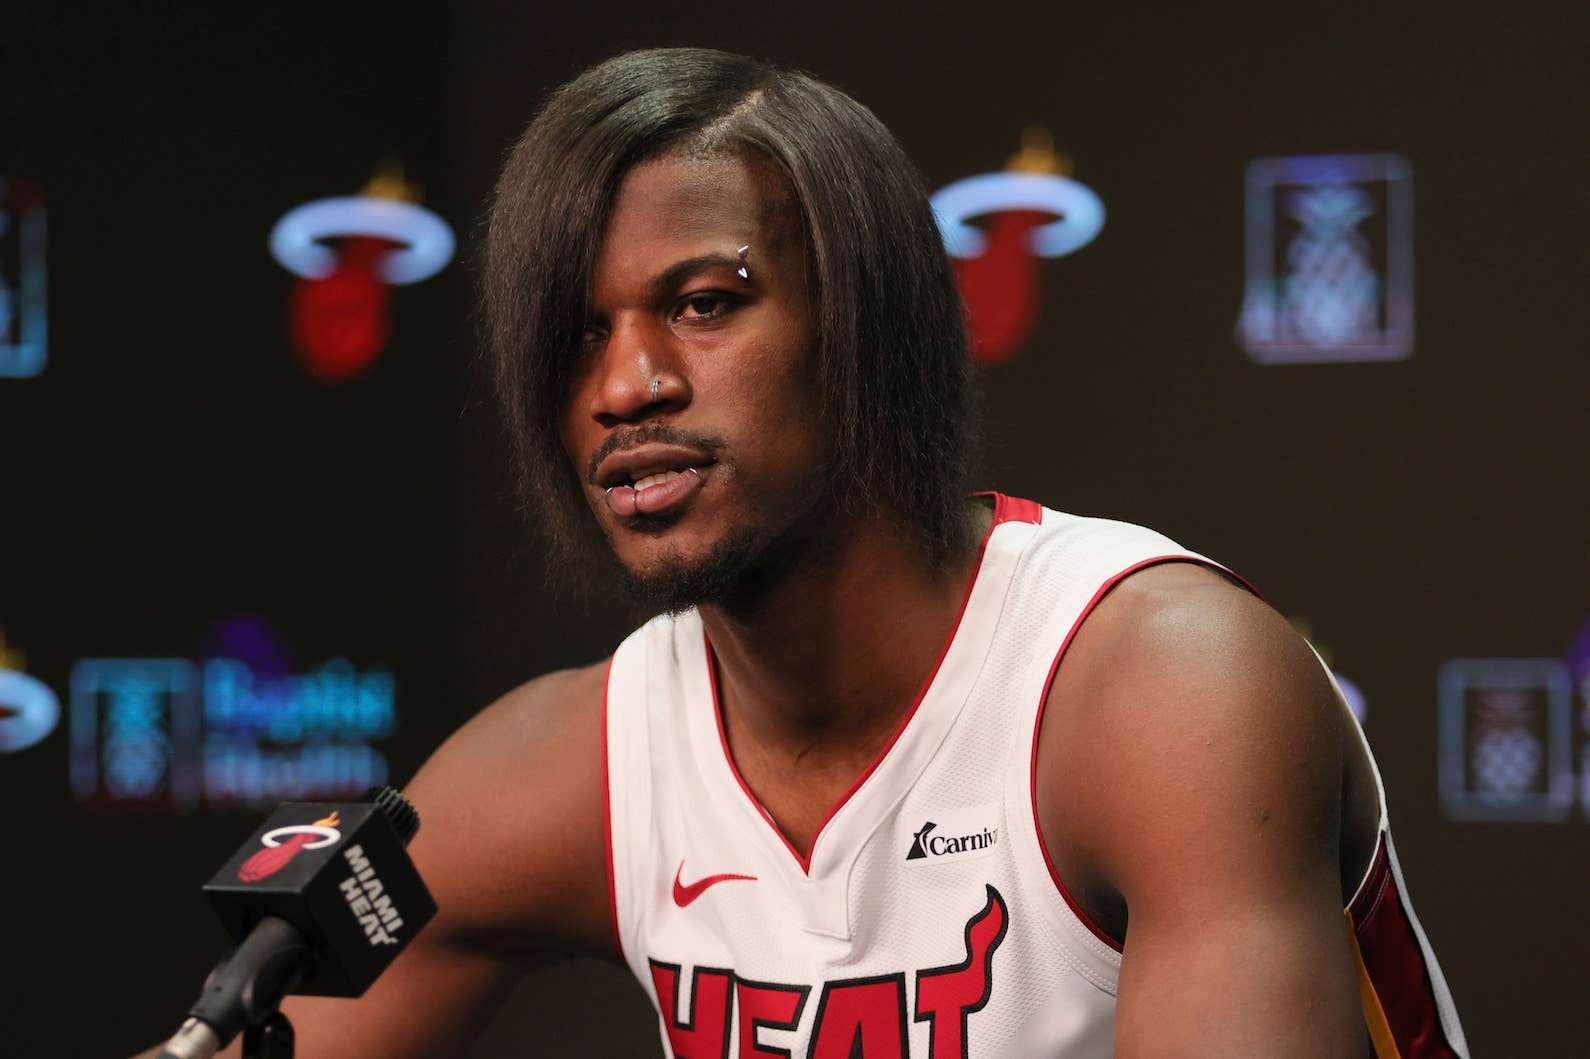 The Miami Heat star's new look arrives a year after he sported dreadlocks at 2022 media day.